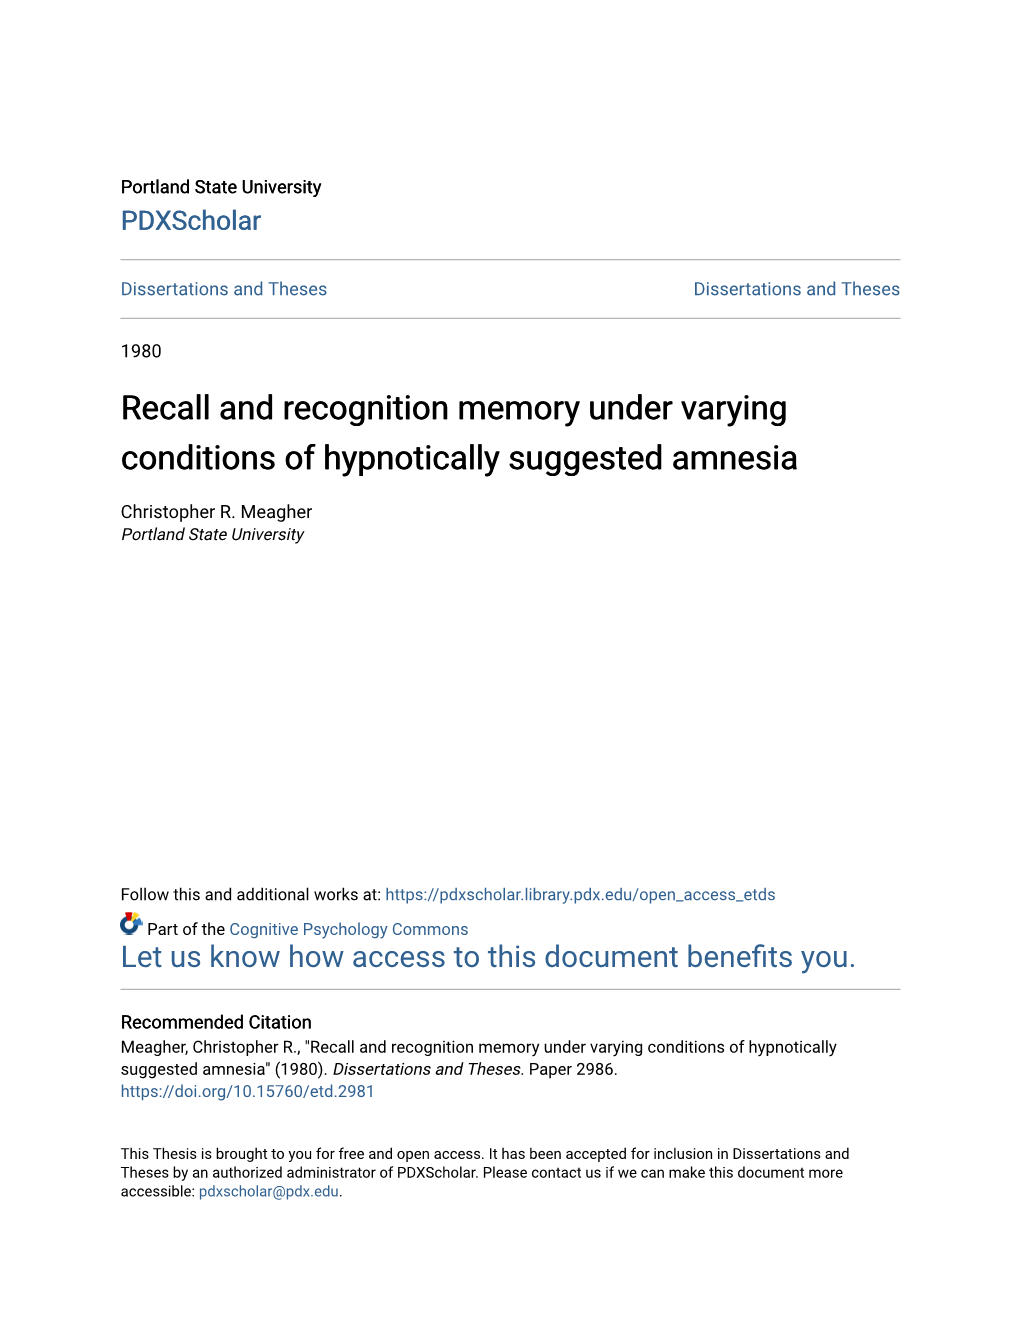 Recall and Recognition Memory Under Varying Conditions of Hypnotically Suggested Amnesia